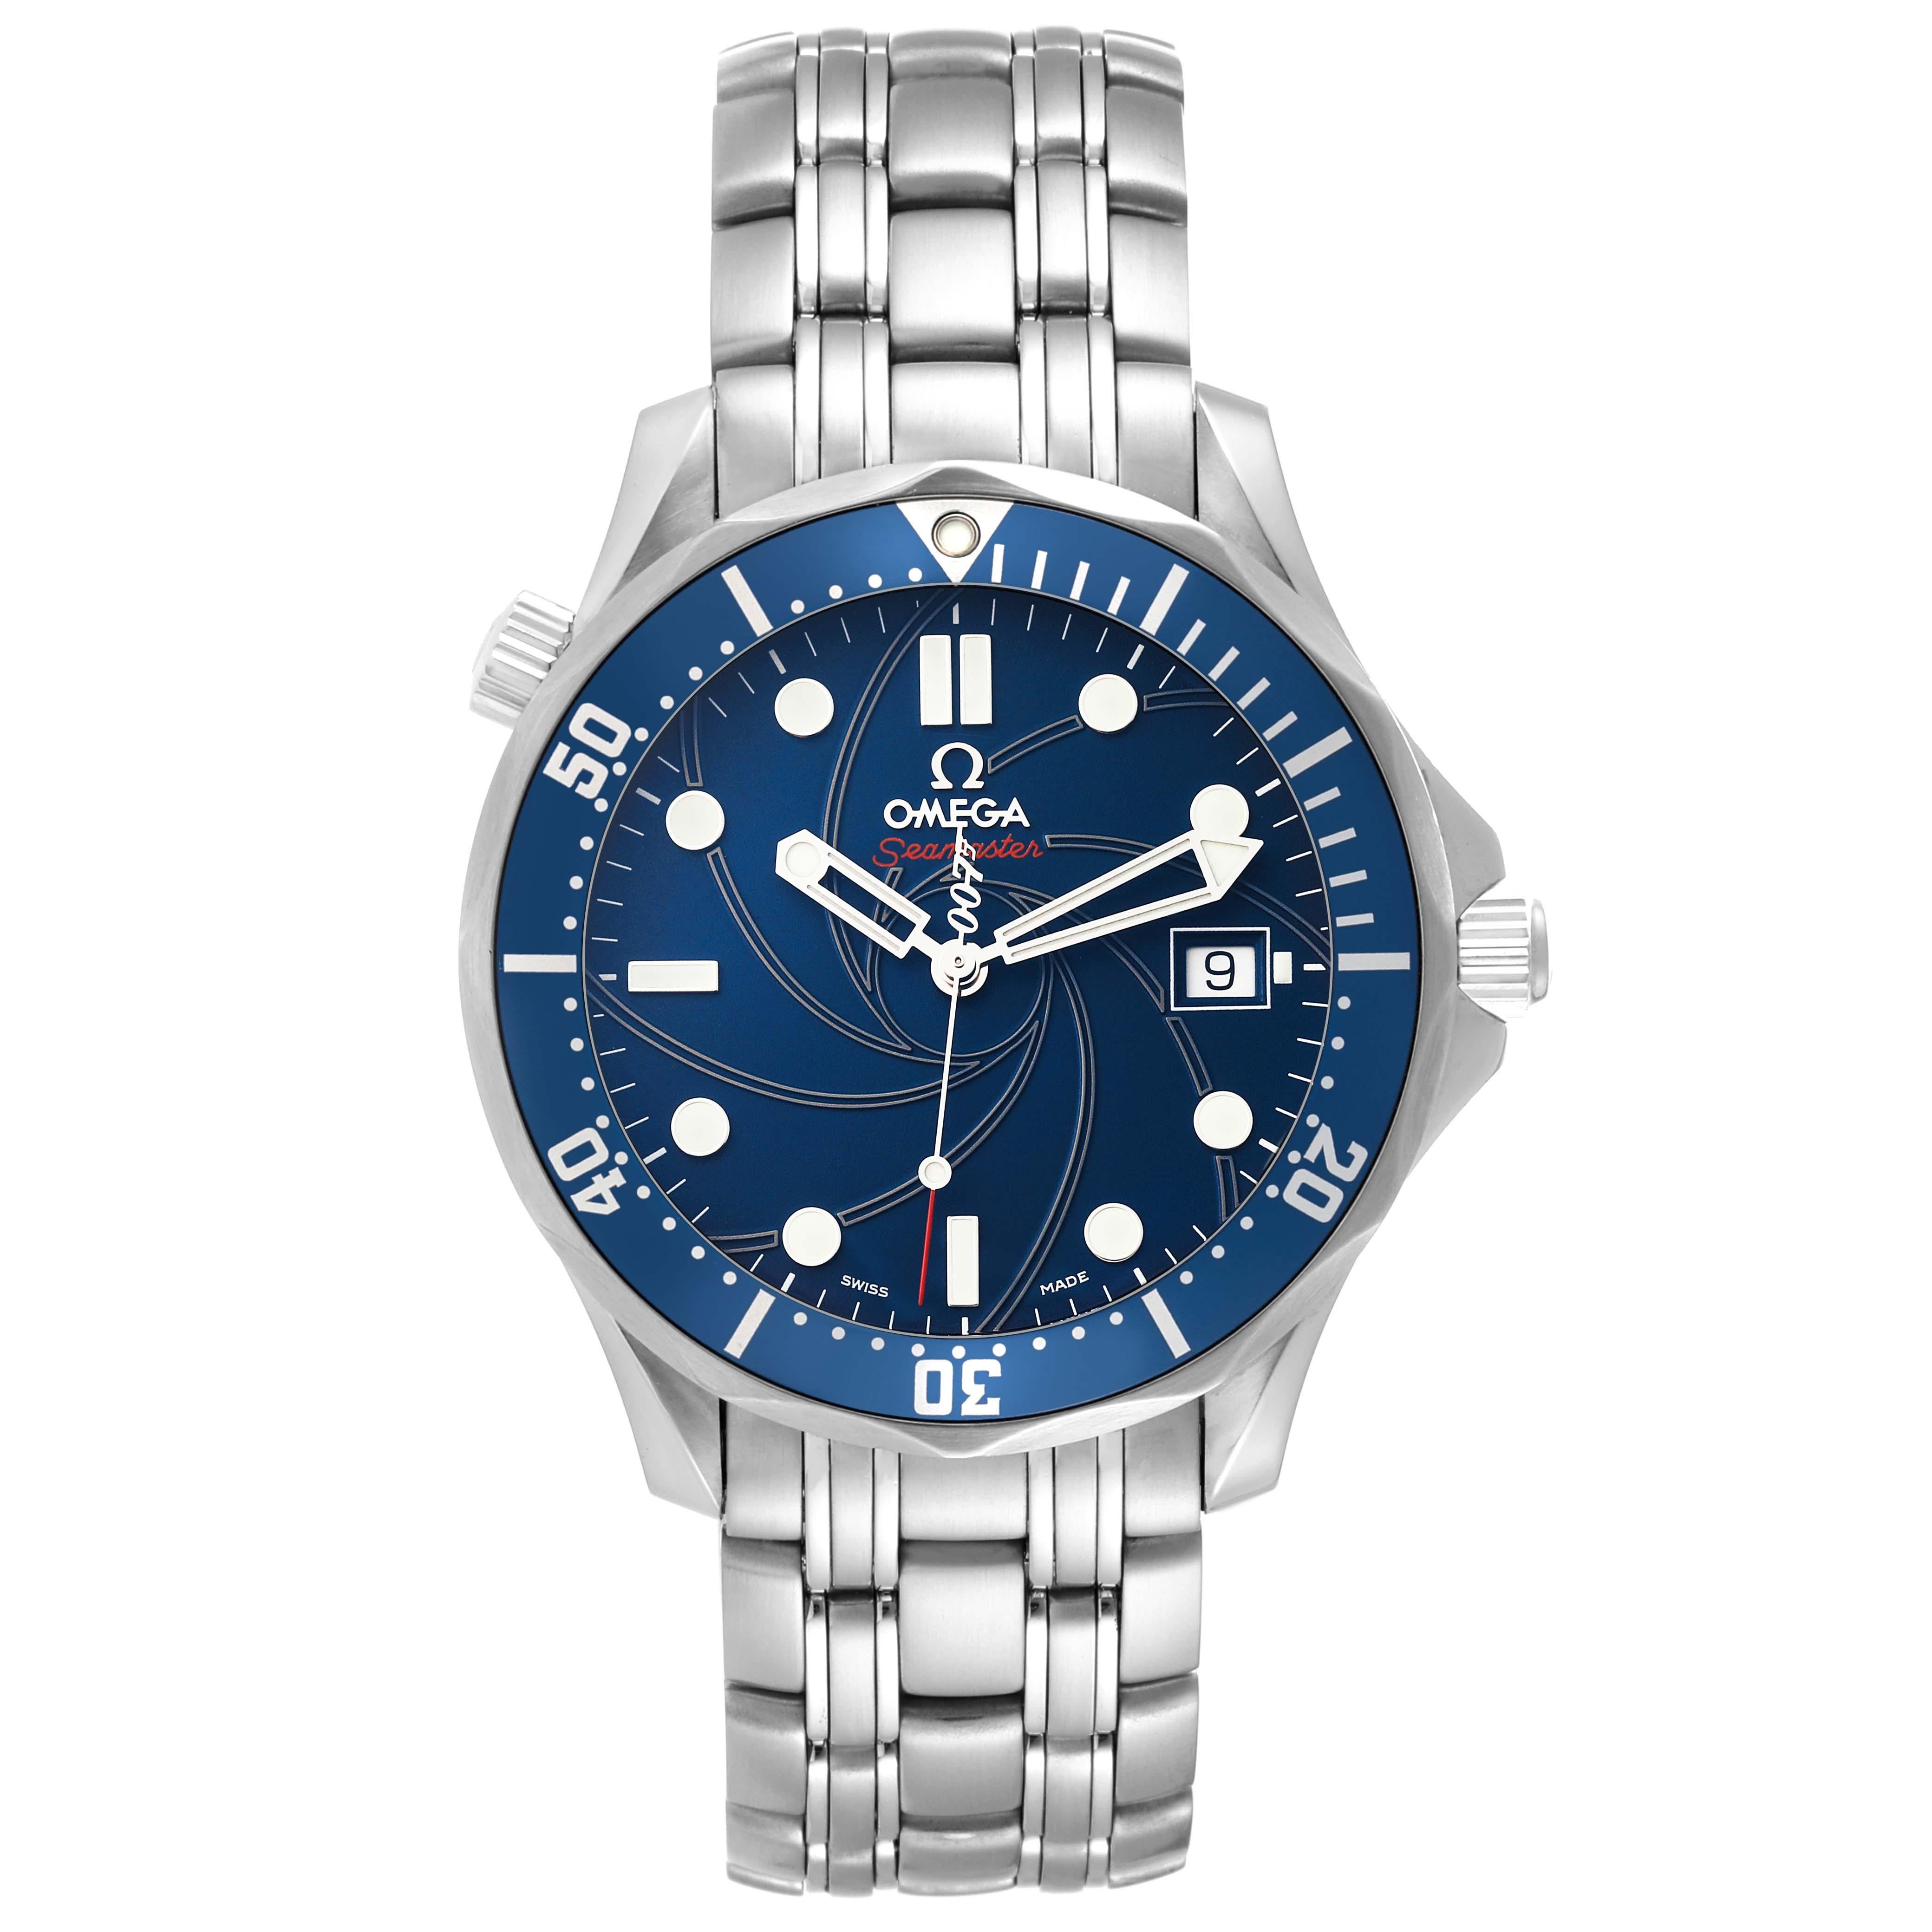 Omega Seamaster Bond 007 Limited Edition Mens Watch 2226.80.00 Box Card. Automatic self-winding movement. Stainless steel case 41.0 mm in diameter. Omega logo on the crown. Unidirectional rotating bezel. Scratch resistant sapphire crystal. Blue gun